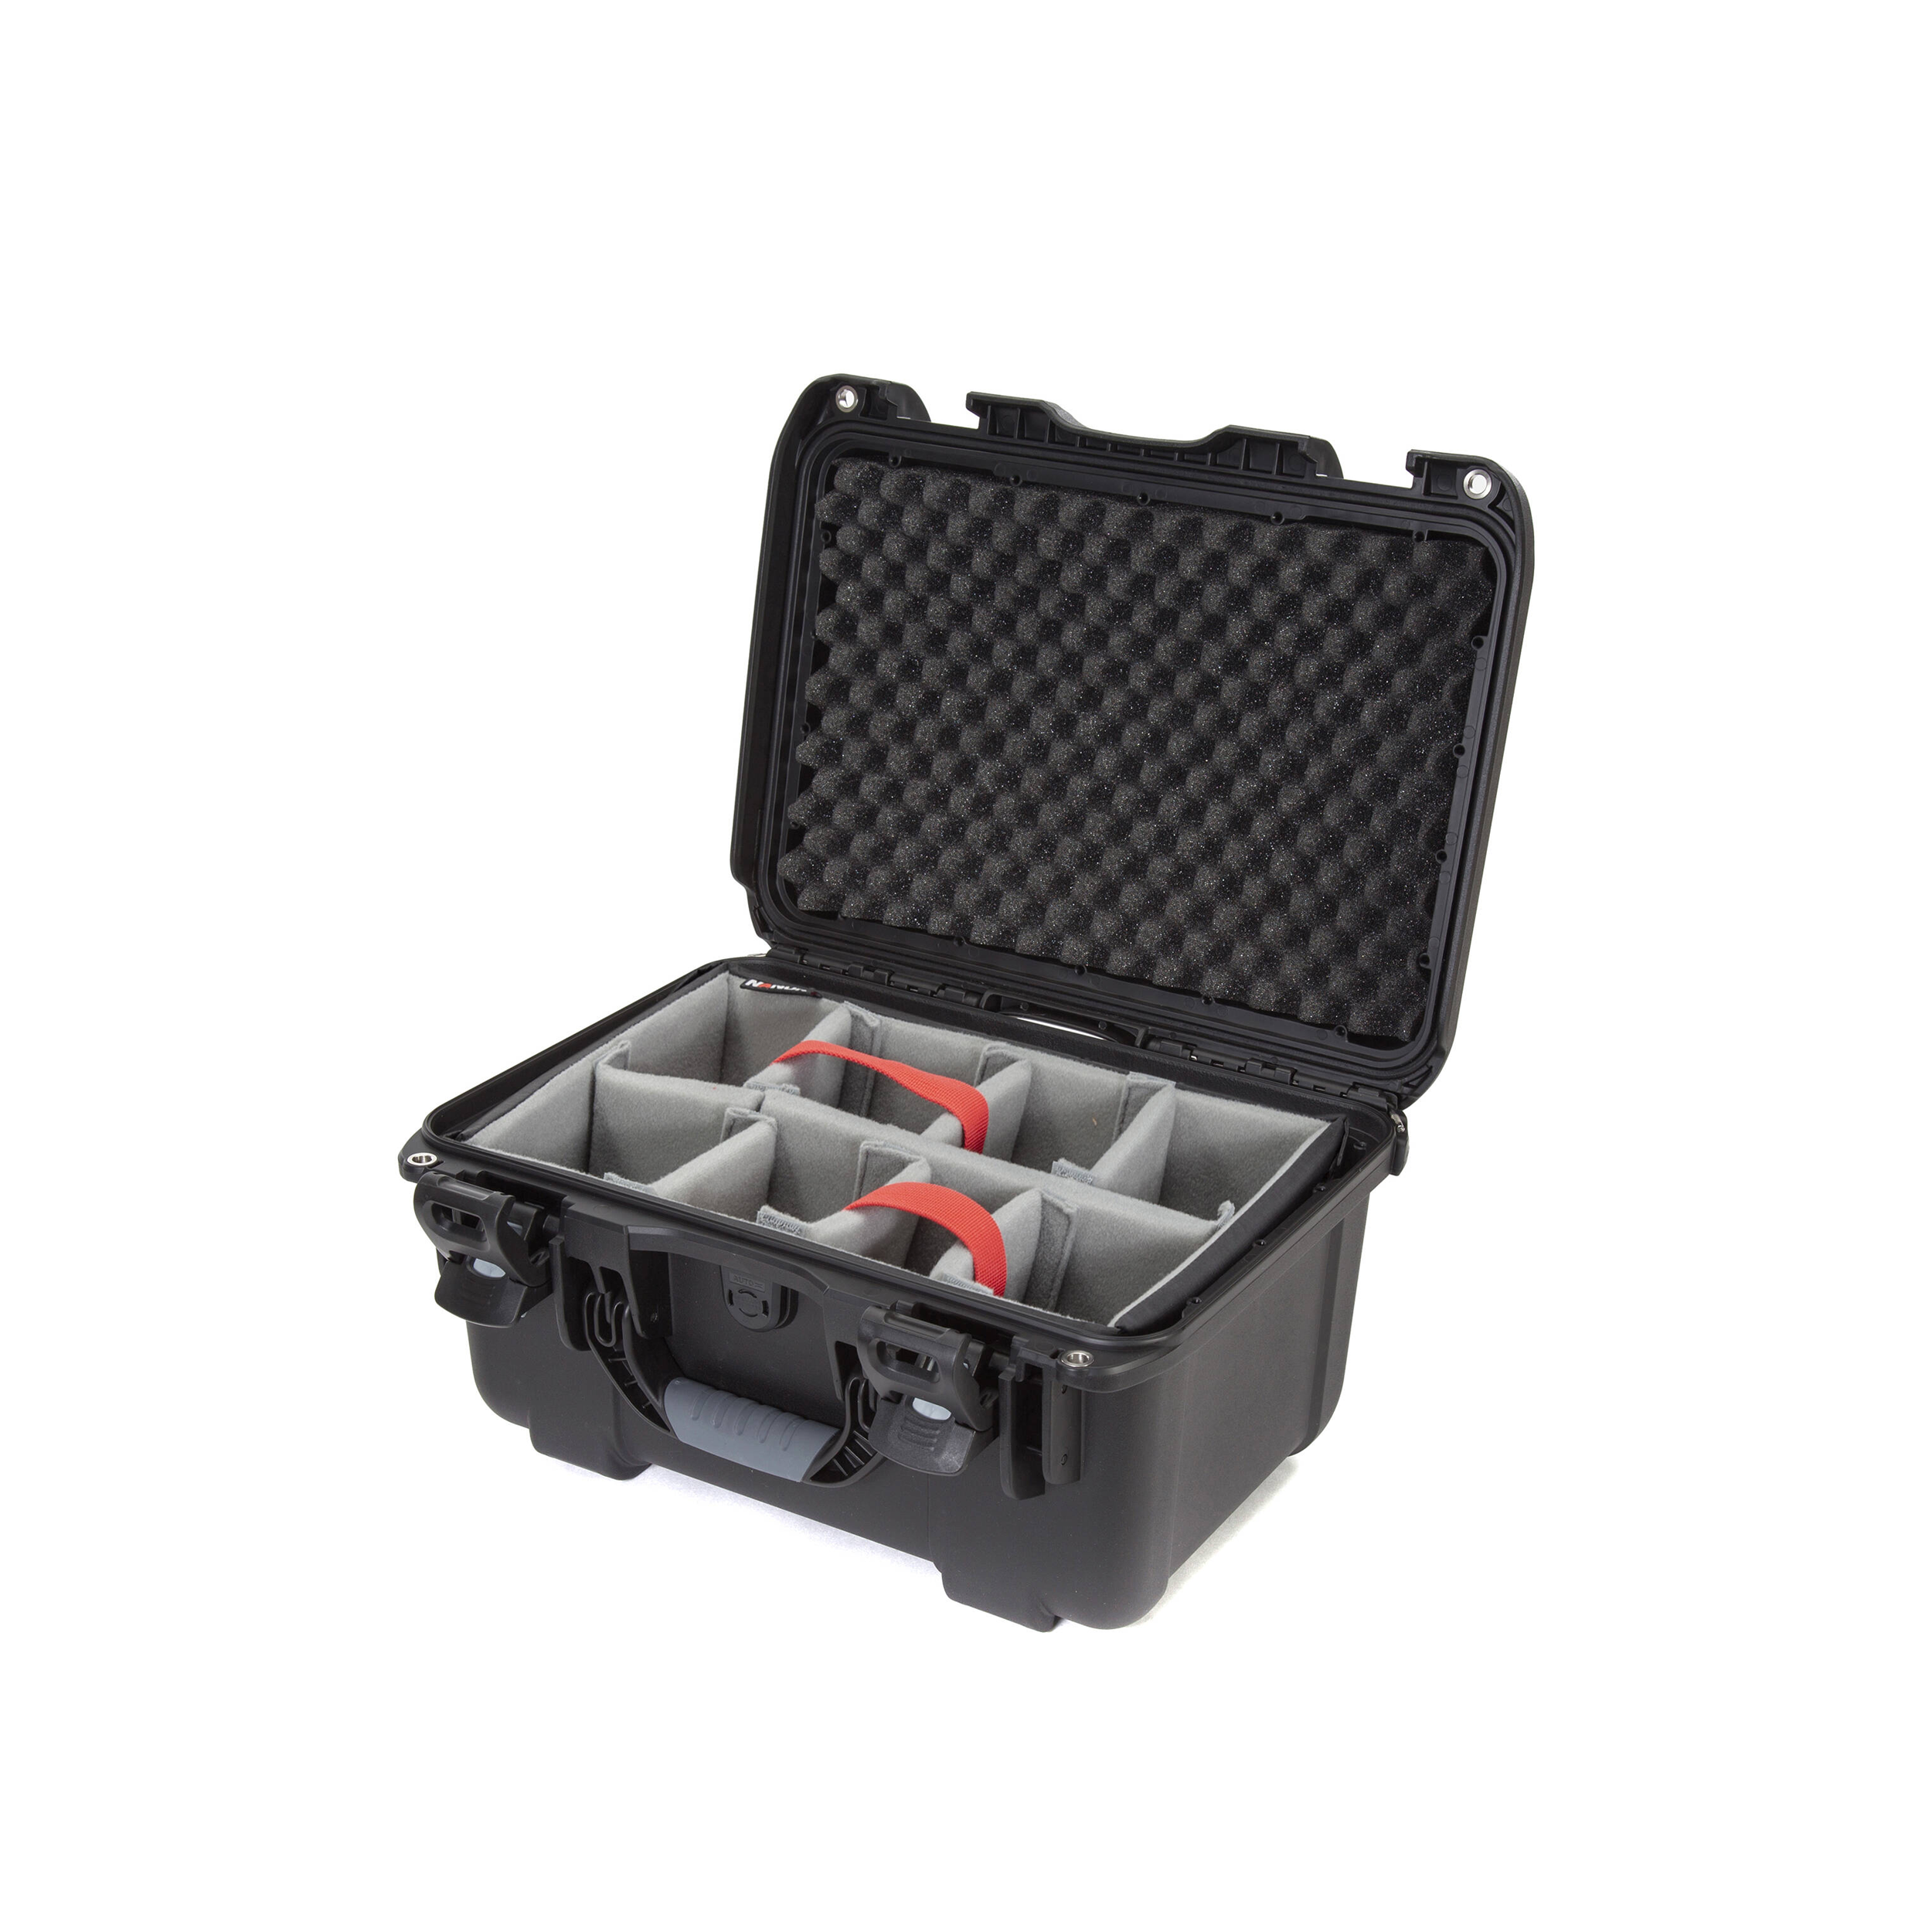 Nanuk 918 Case with Padded Dividers